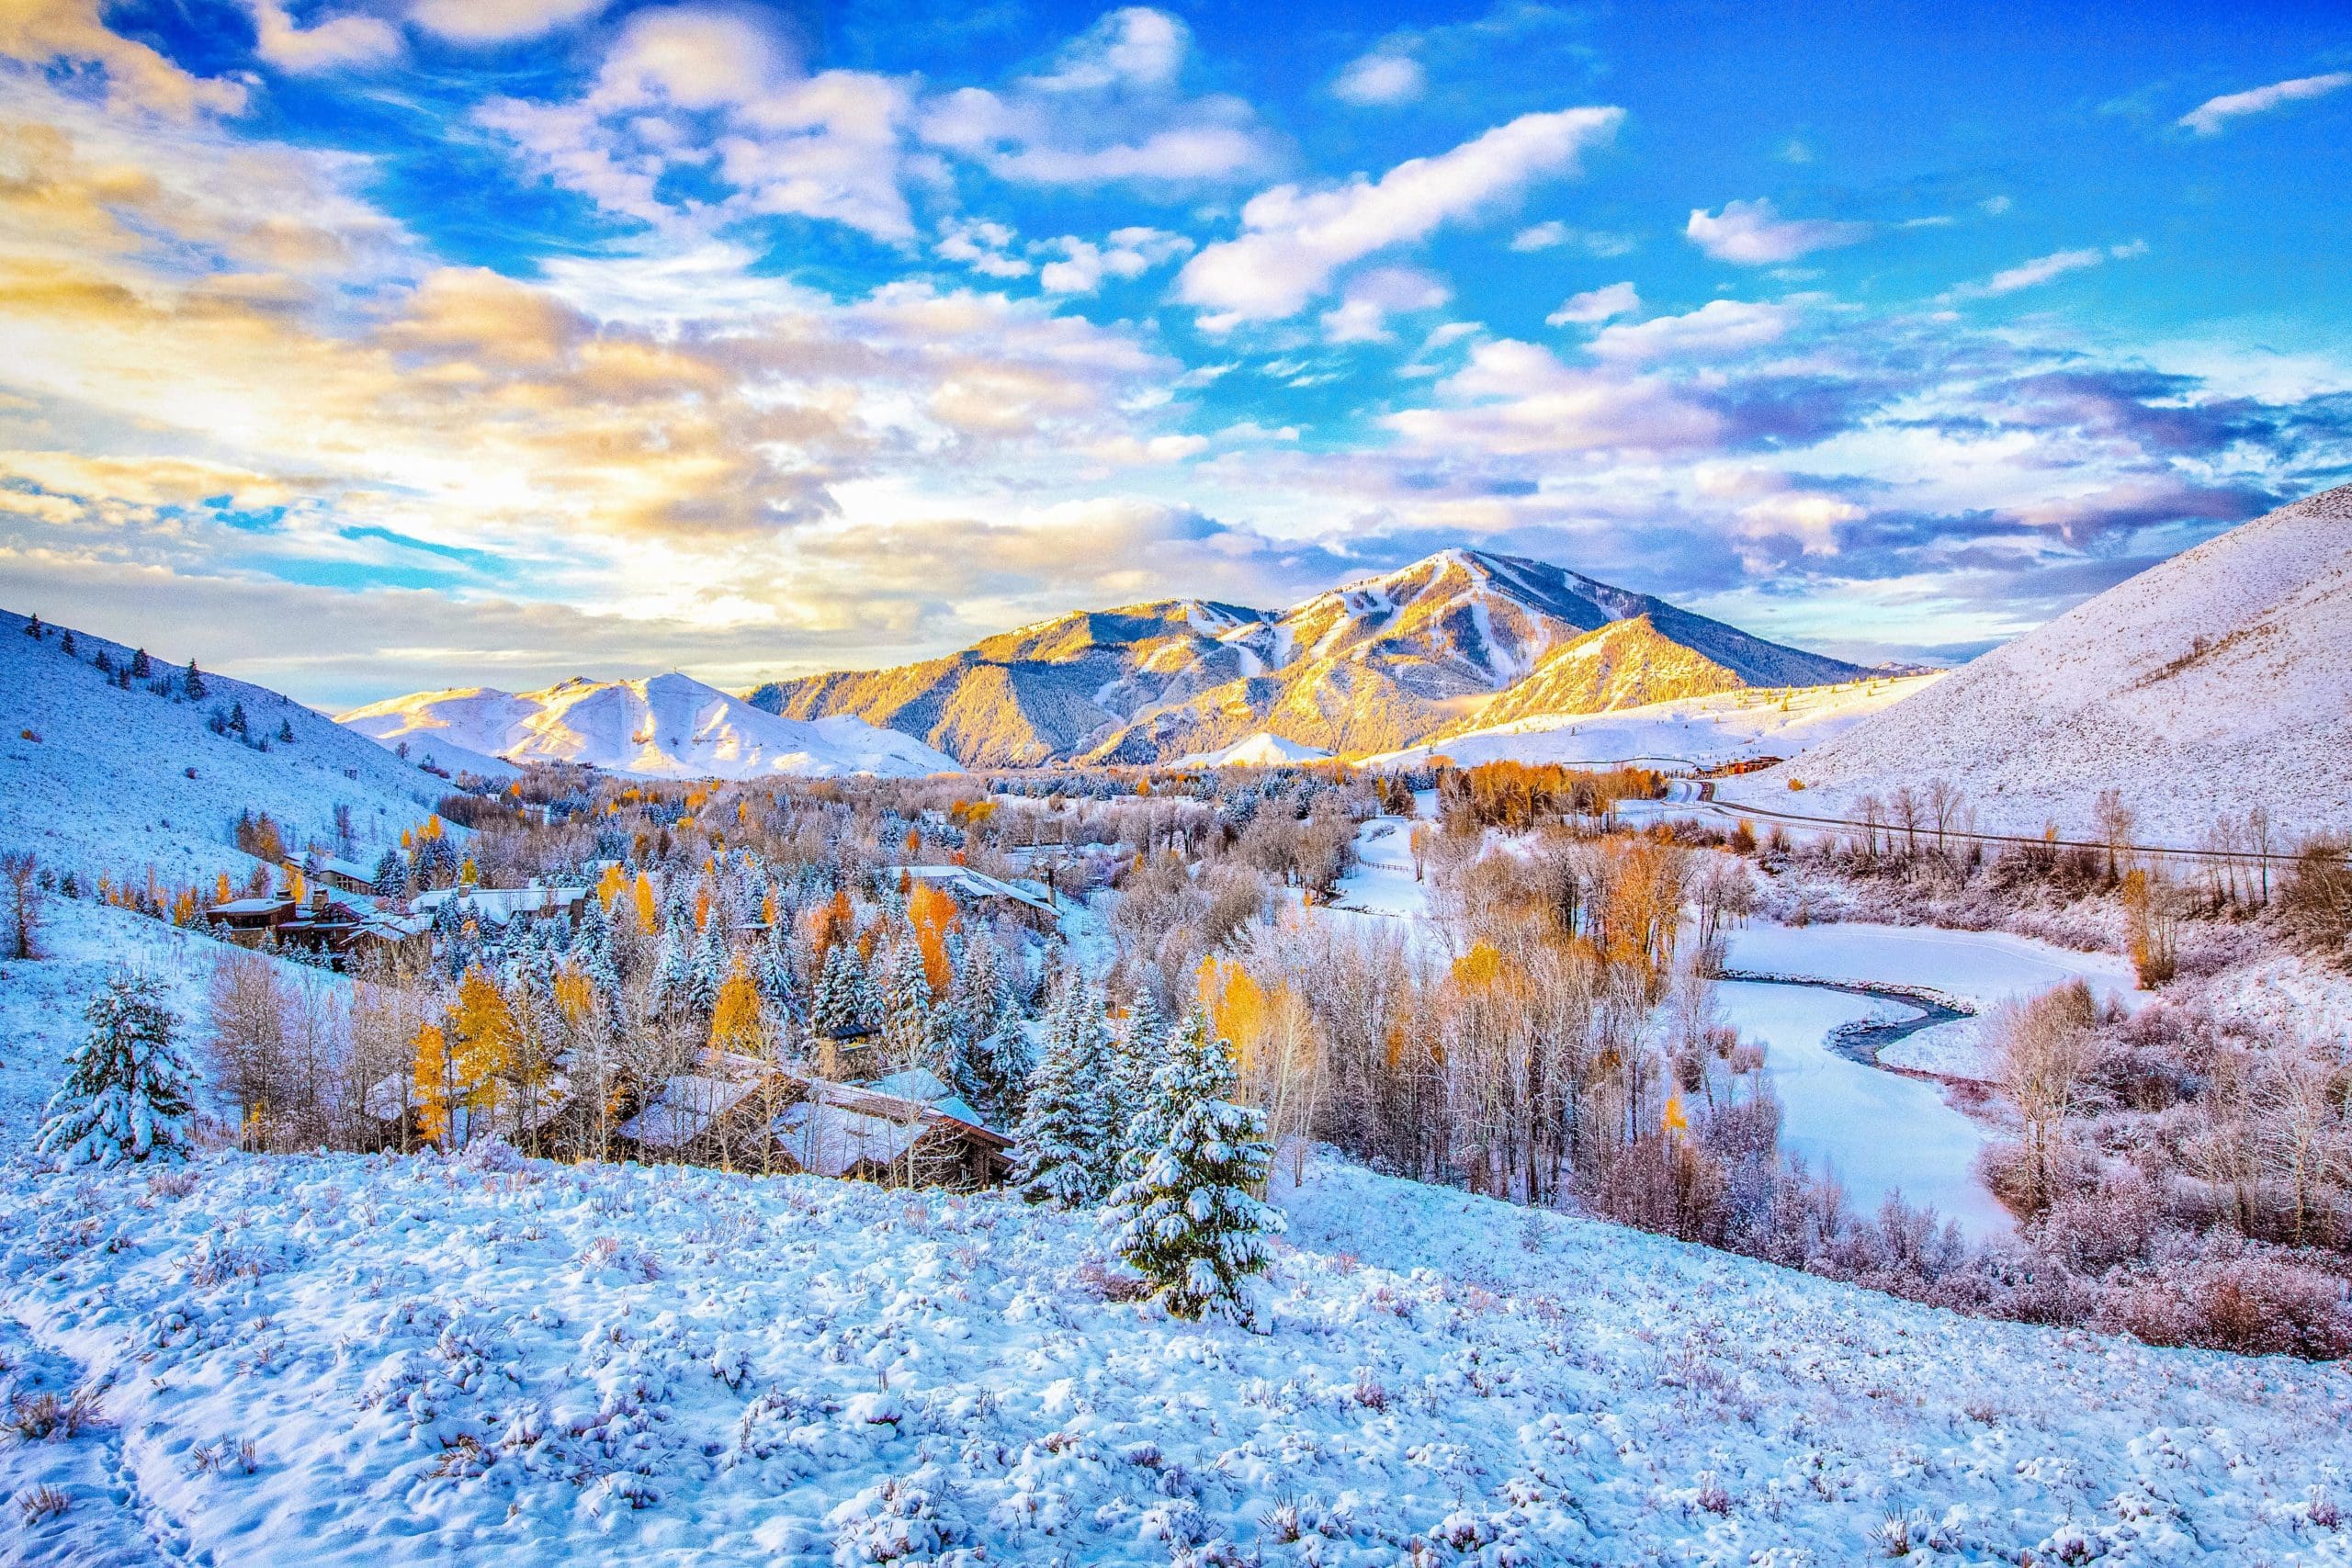 How To Spend A Winter Adventure Weekend In Ketchum, Idaho